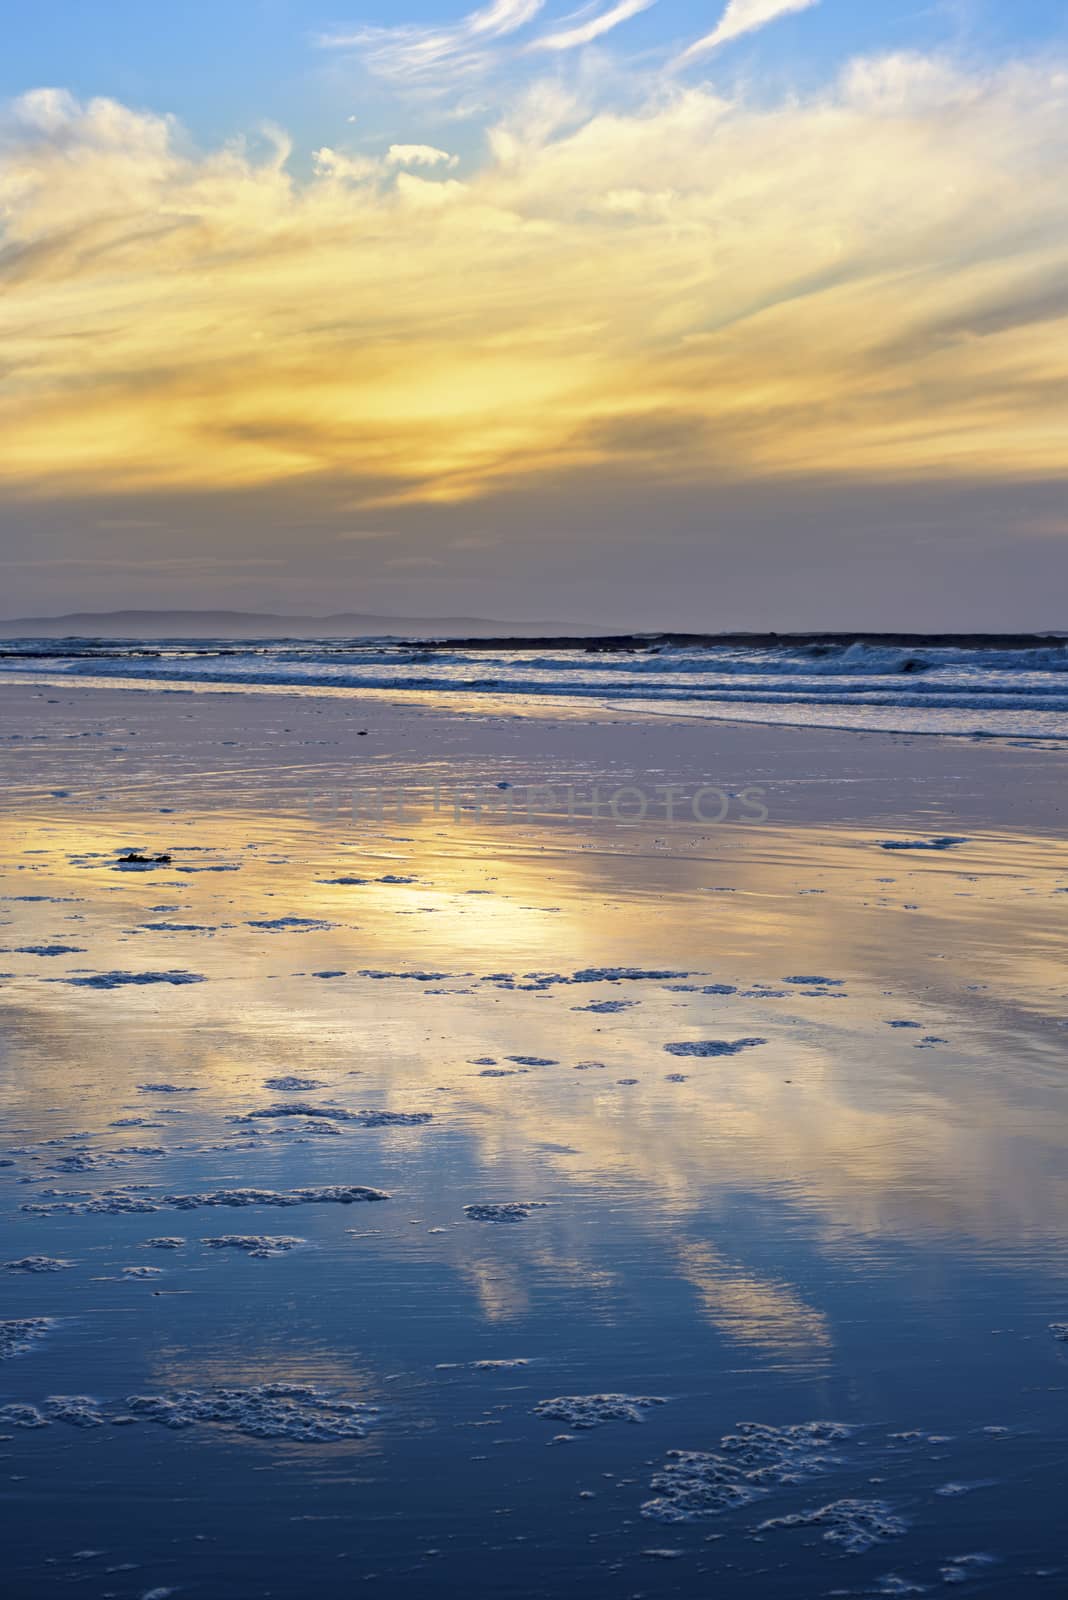 reflections and calm waves crashing onto the beach at ballybunion in ireland